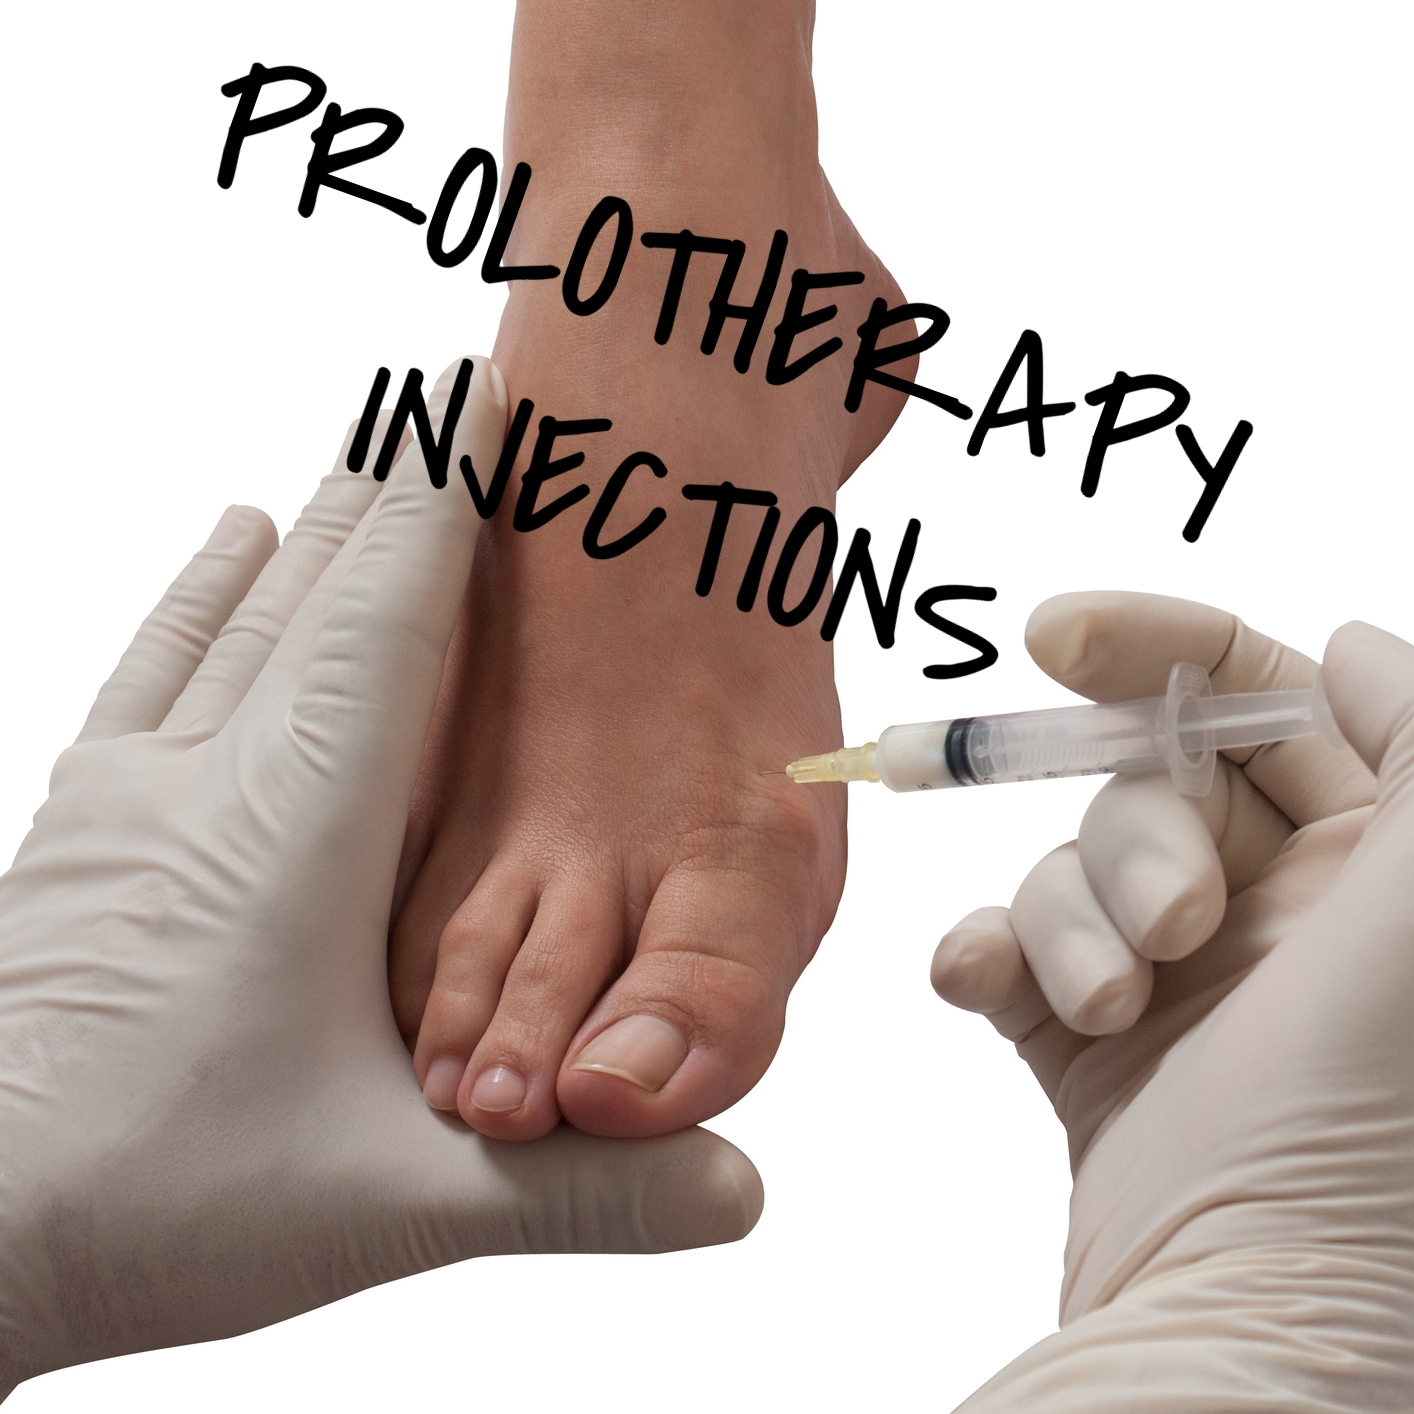 Prolotherapy Injections